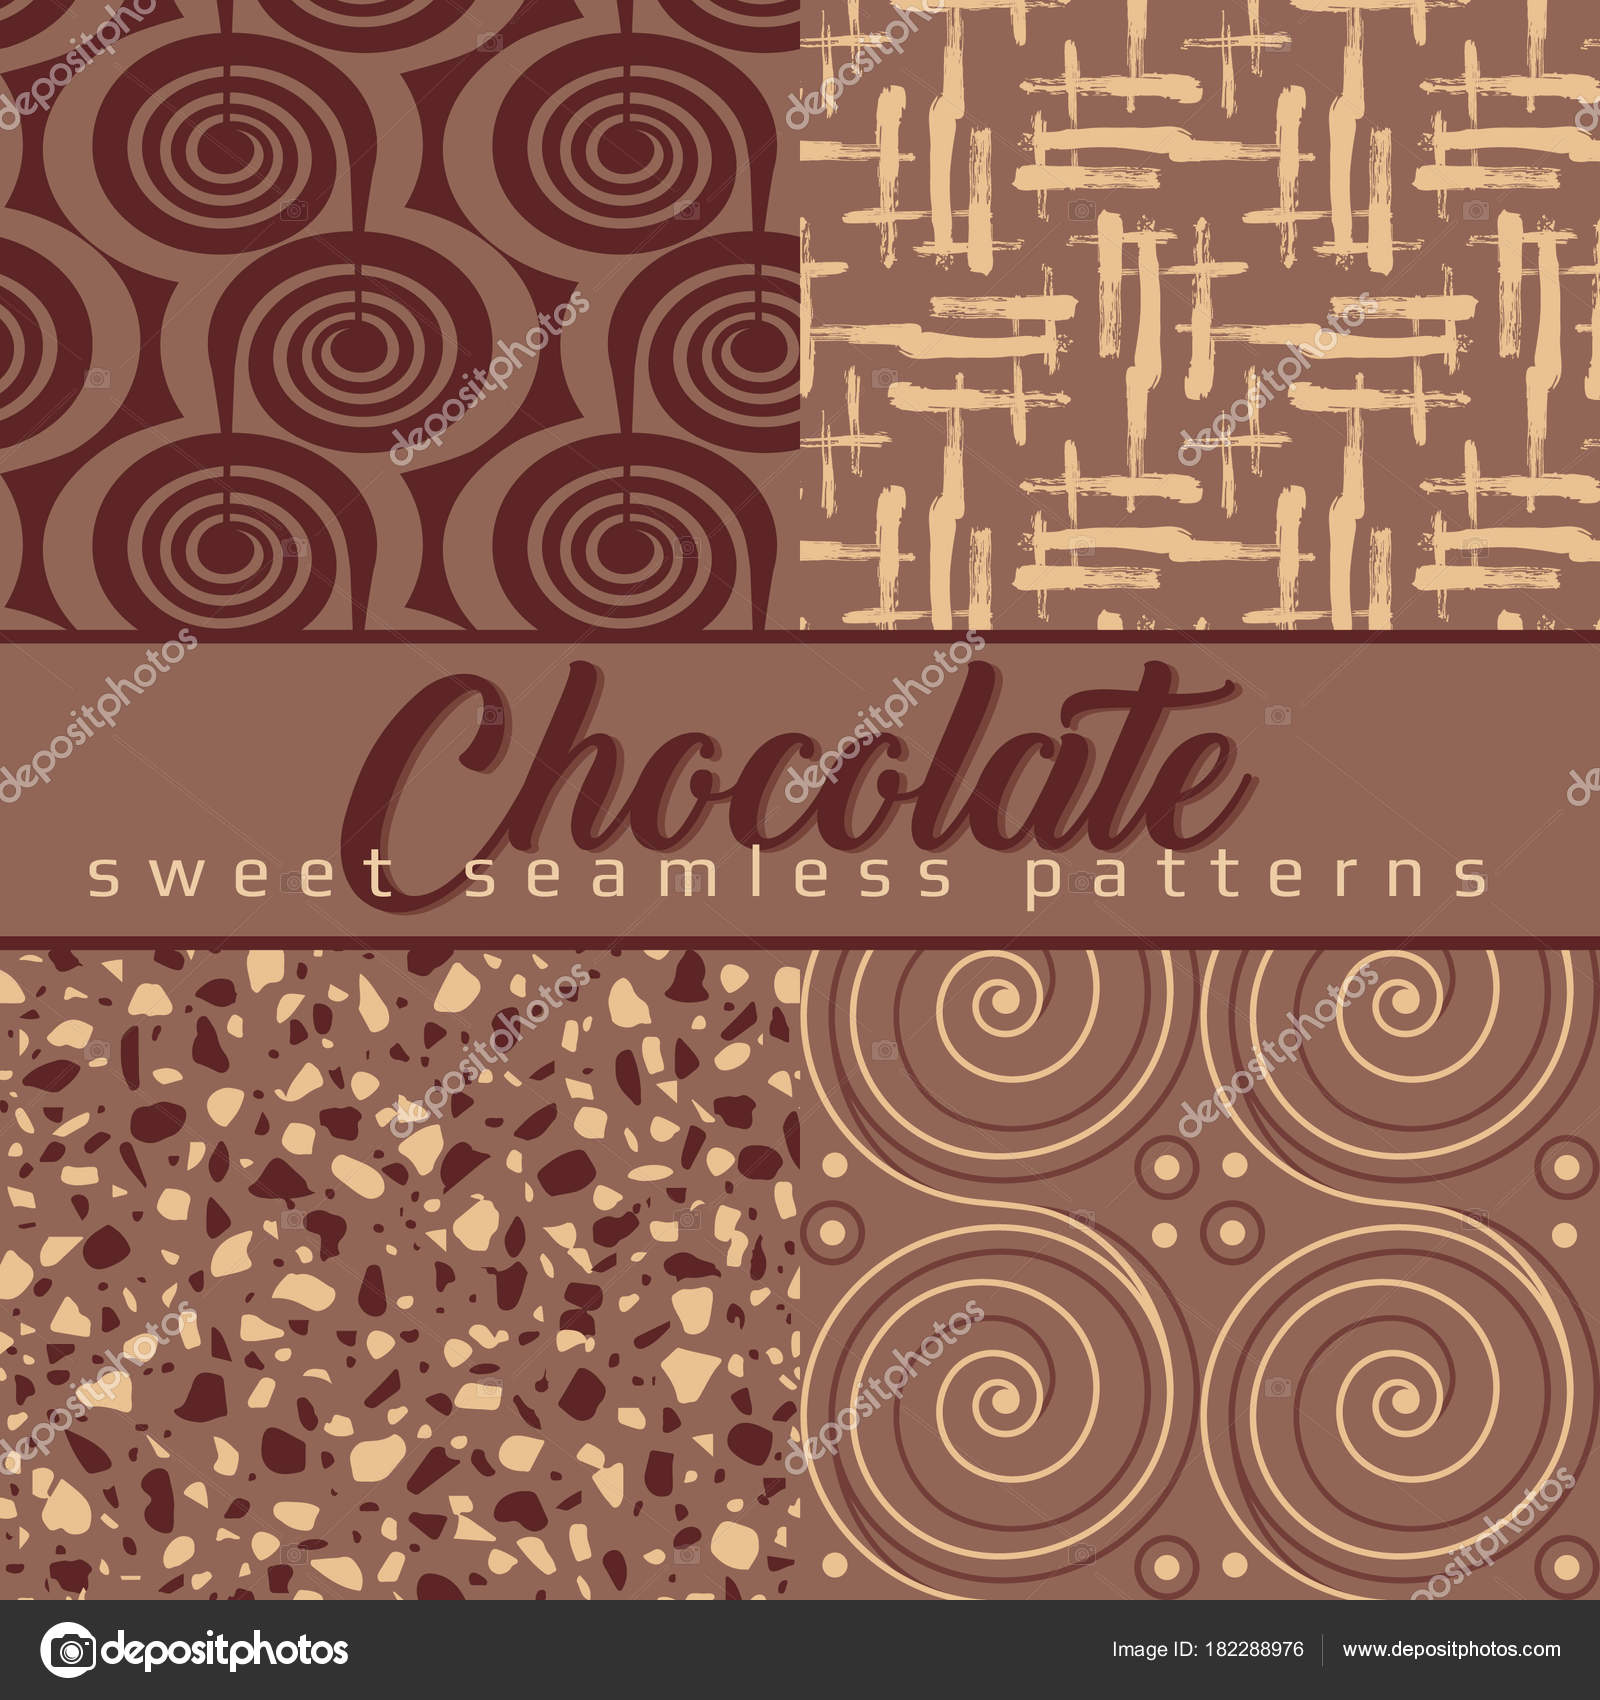 Chocolate Cream Decorative Tiles Creating Patterns Can Used